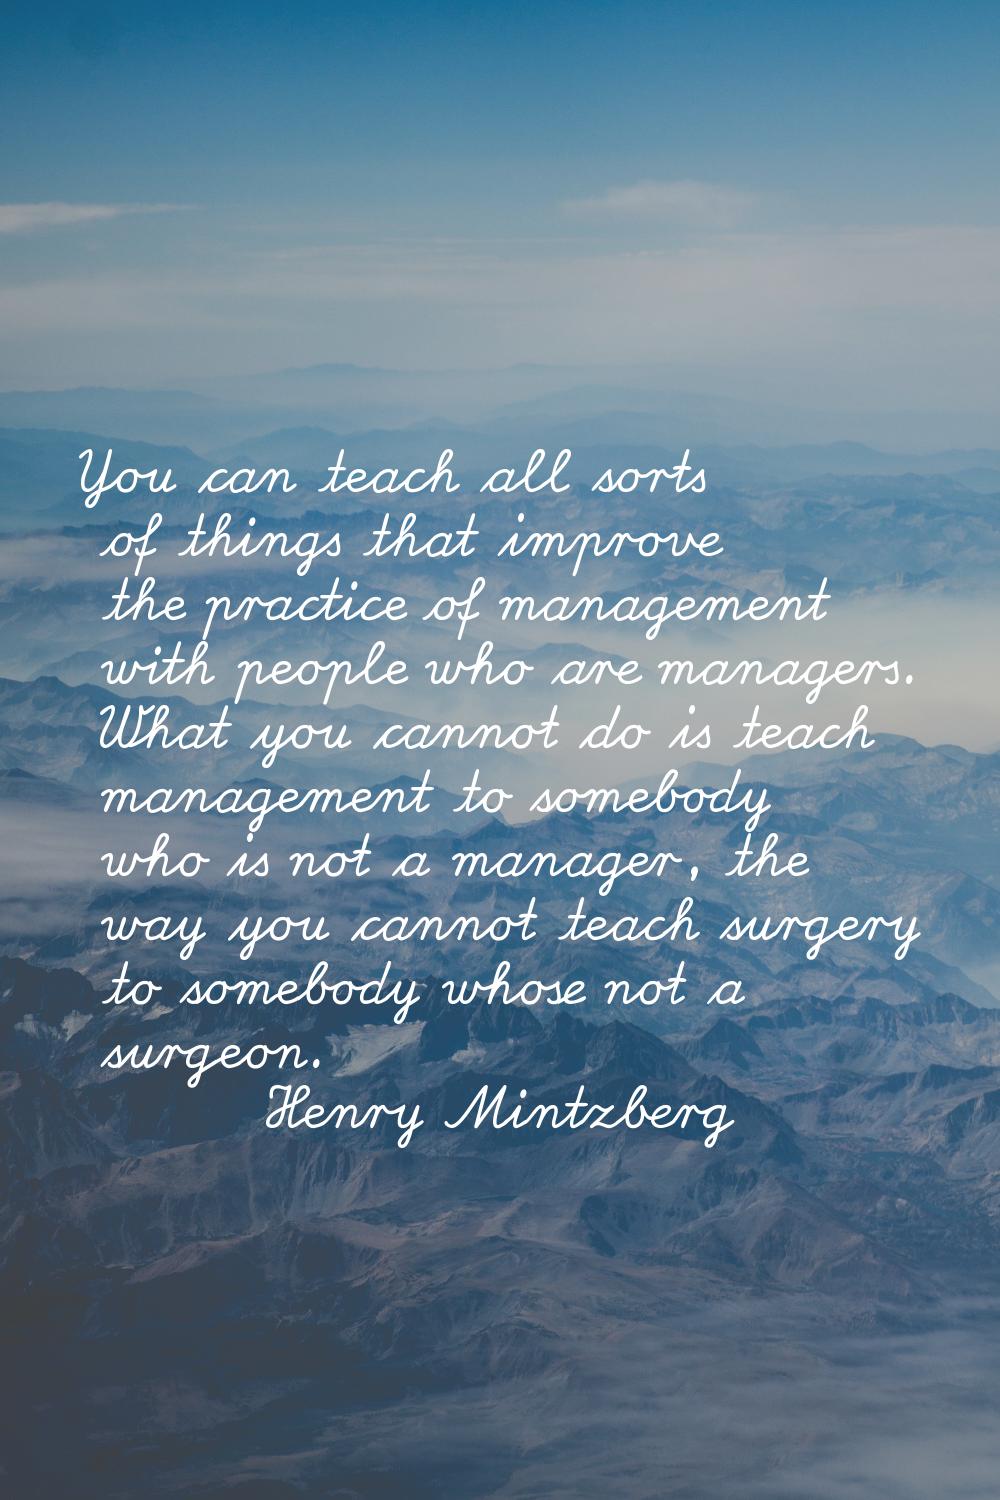 You can teach all sorts of things that improve the practice of management with people who are manag